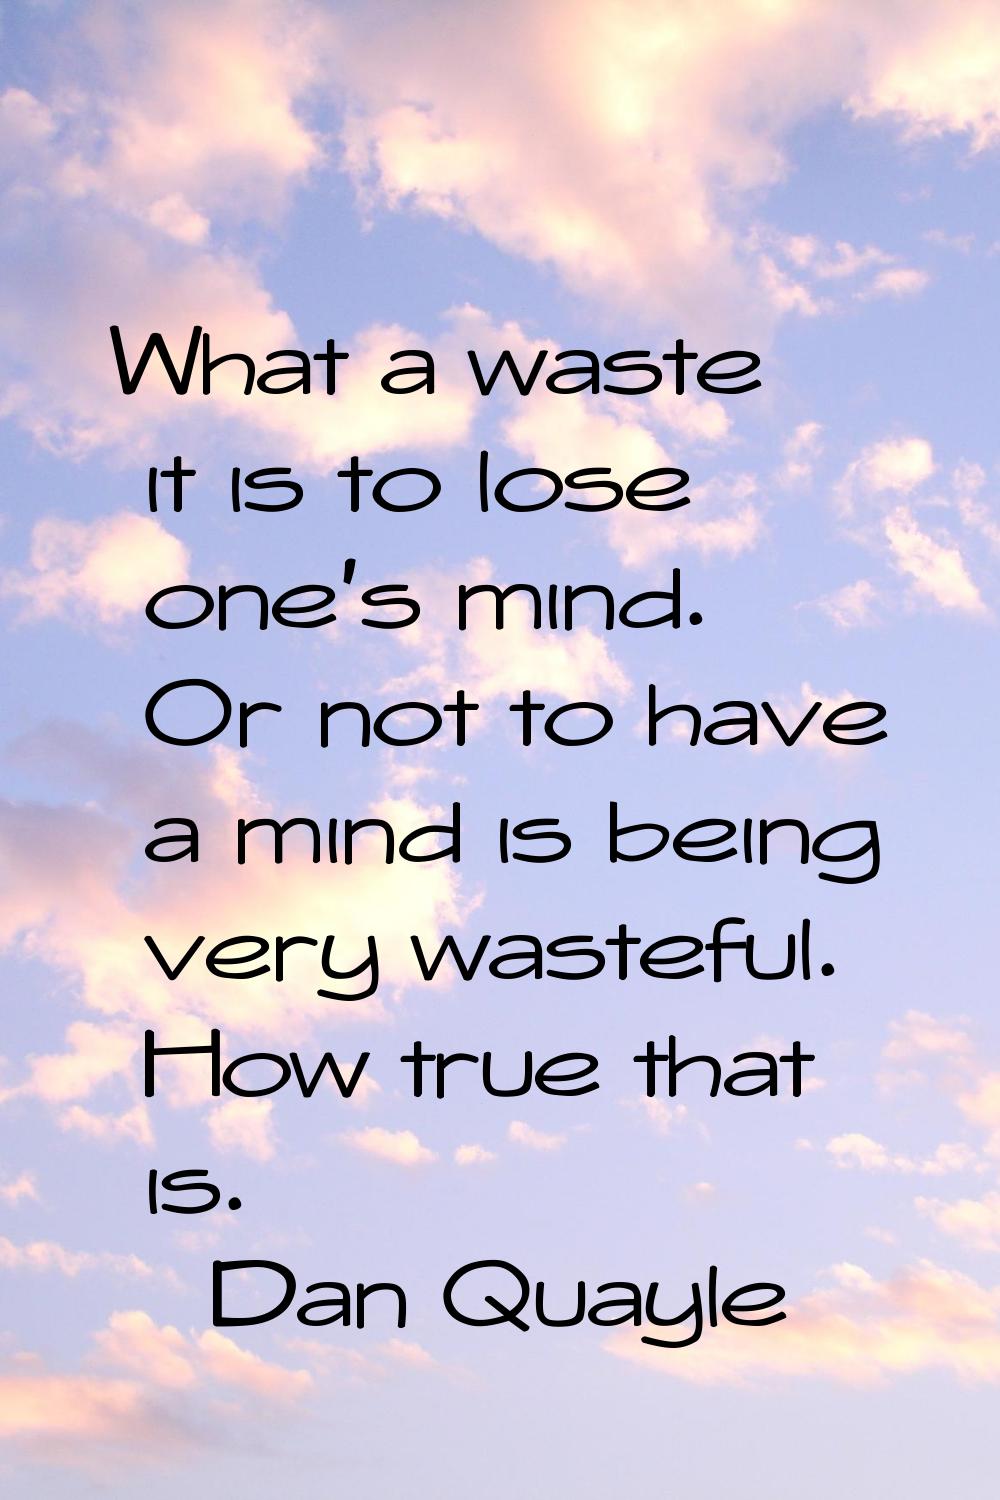 What a waste it is to lose one's mind. Or not to have a mind is being very wasteful. How true that 